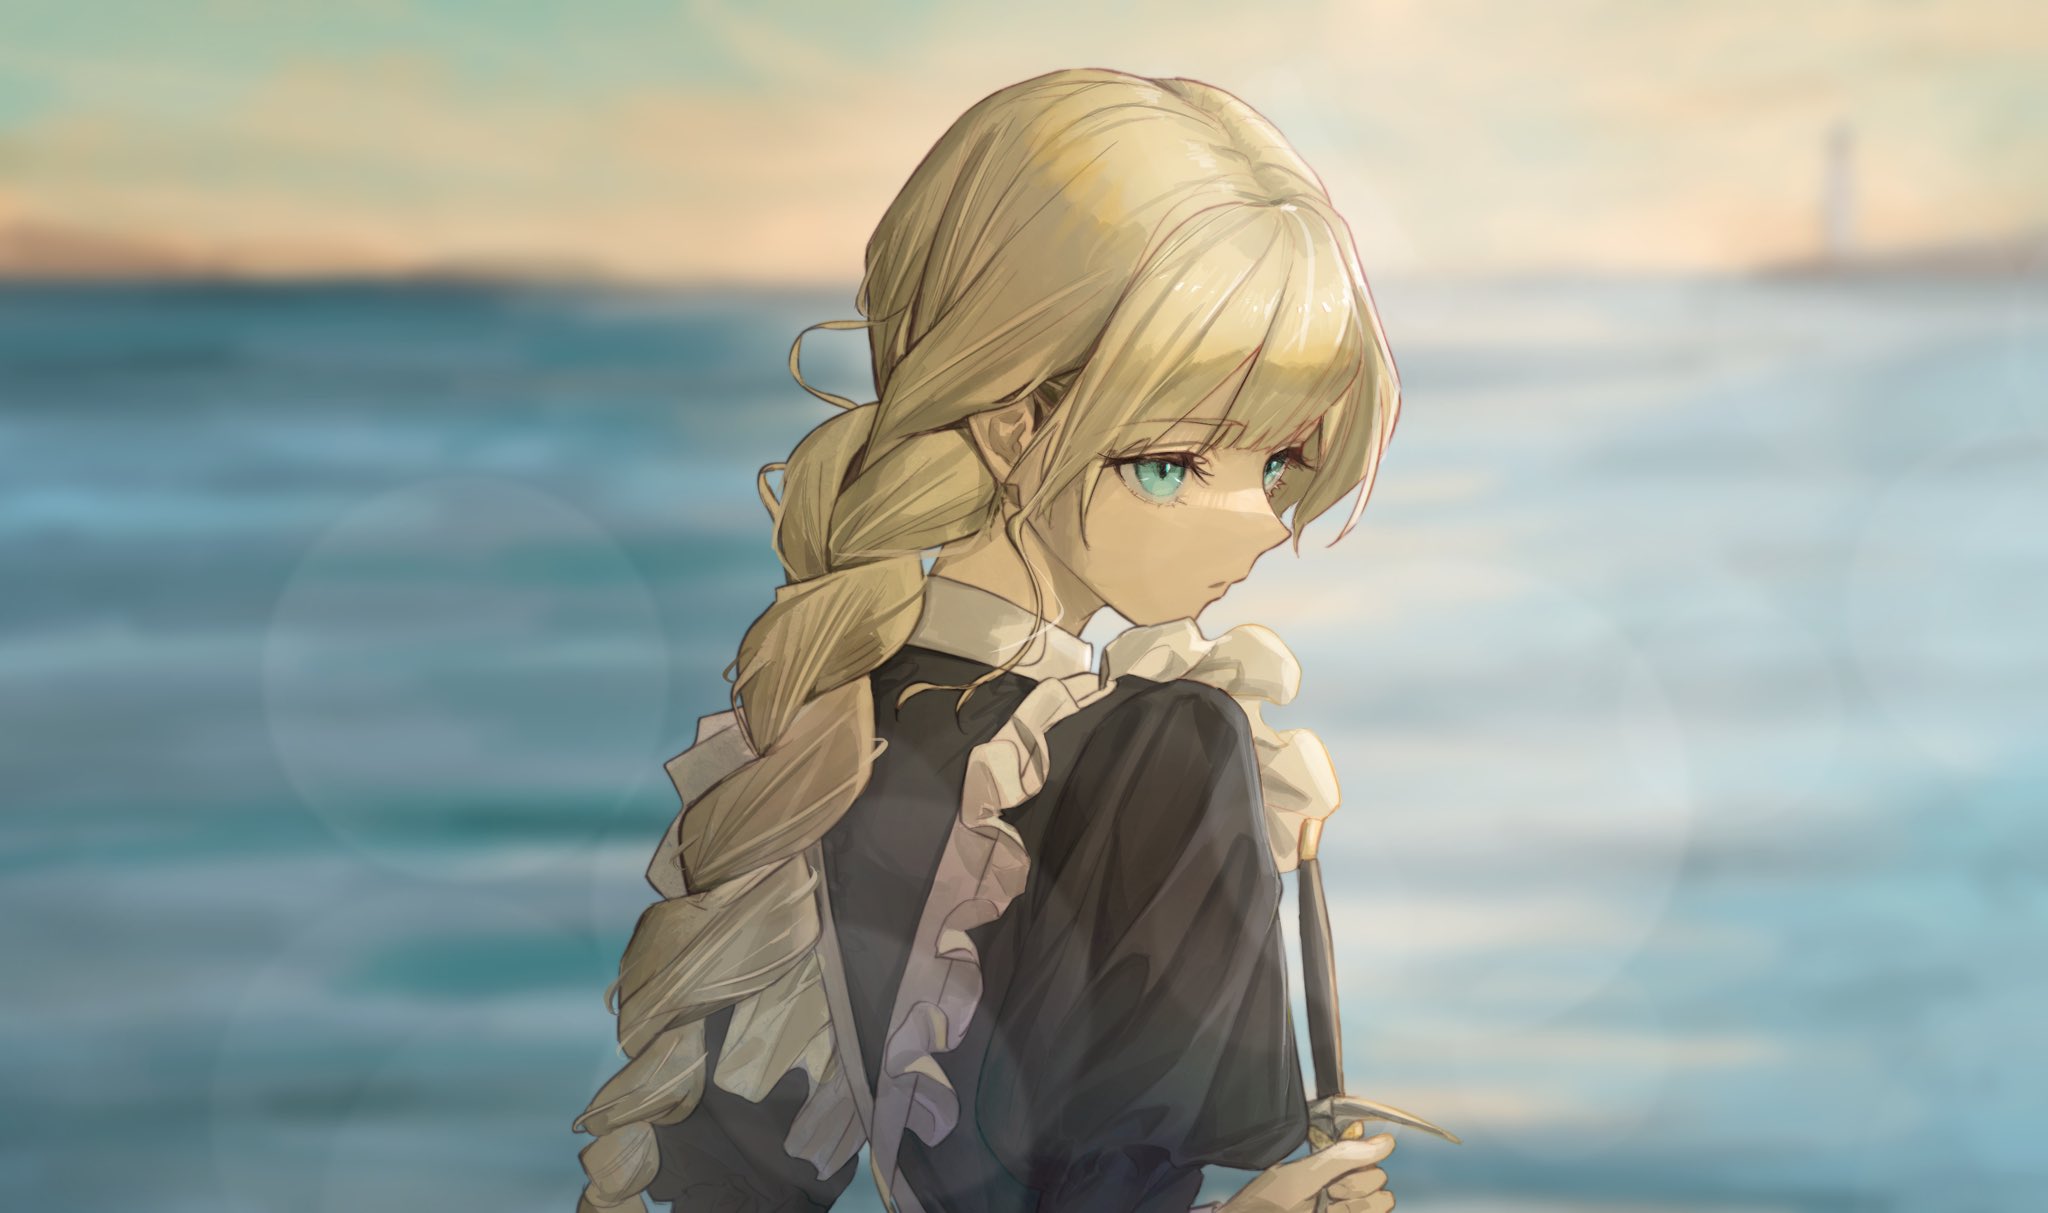 Anime 2048x1213 anime girls maid blonde looking over shoulder sea lighthouse sword blurry background braids blurred maid outfit looking away water